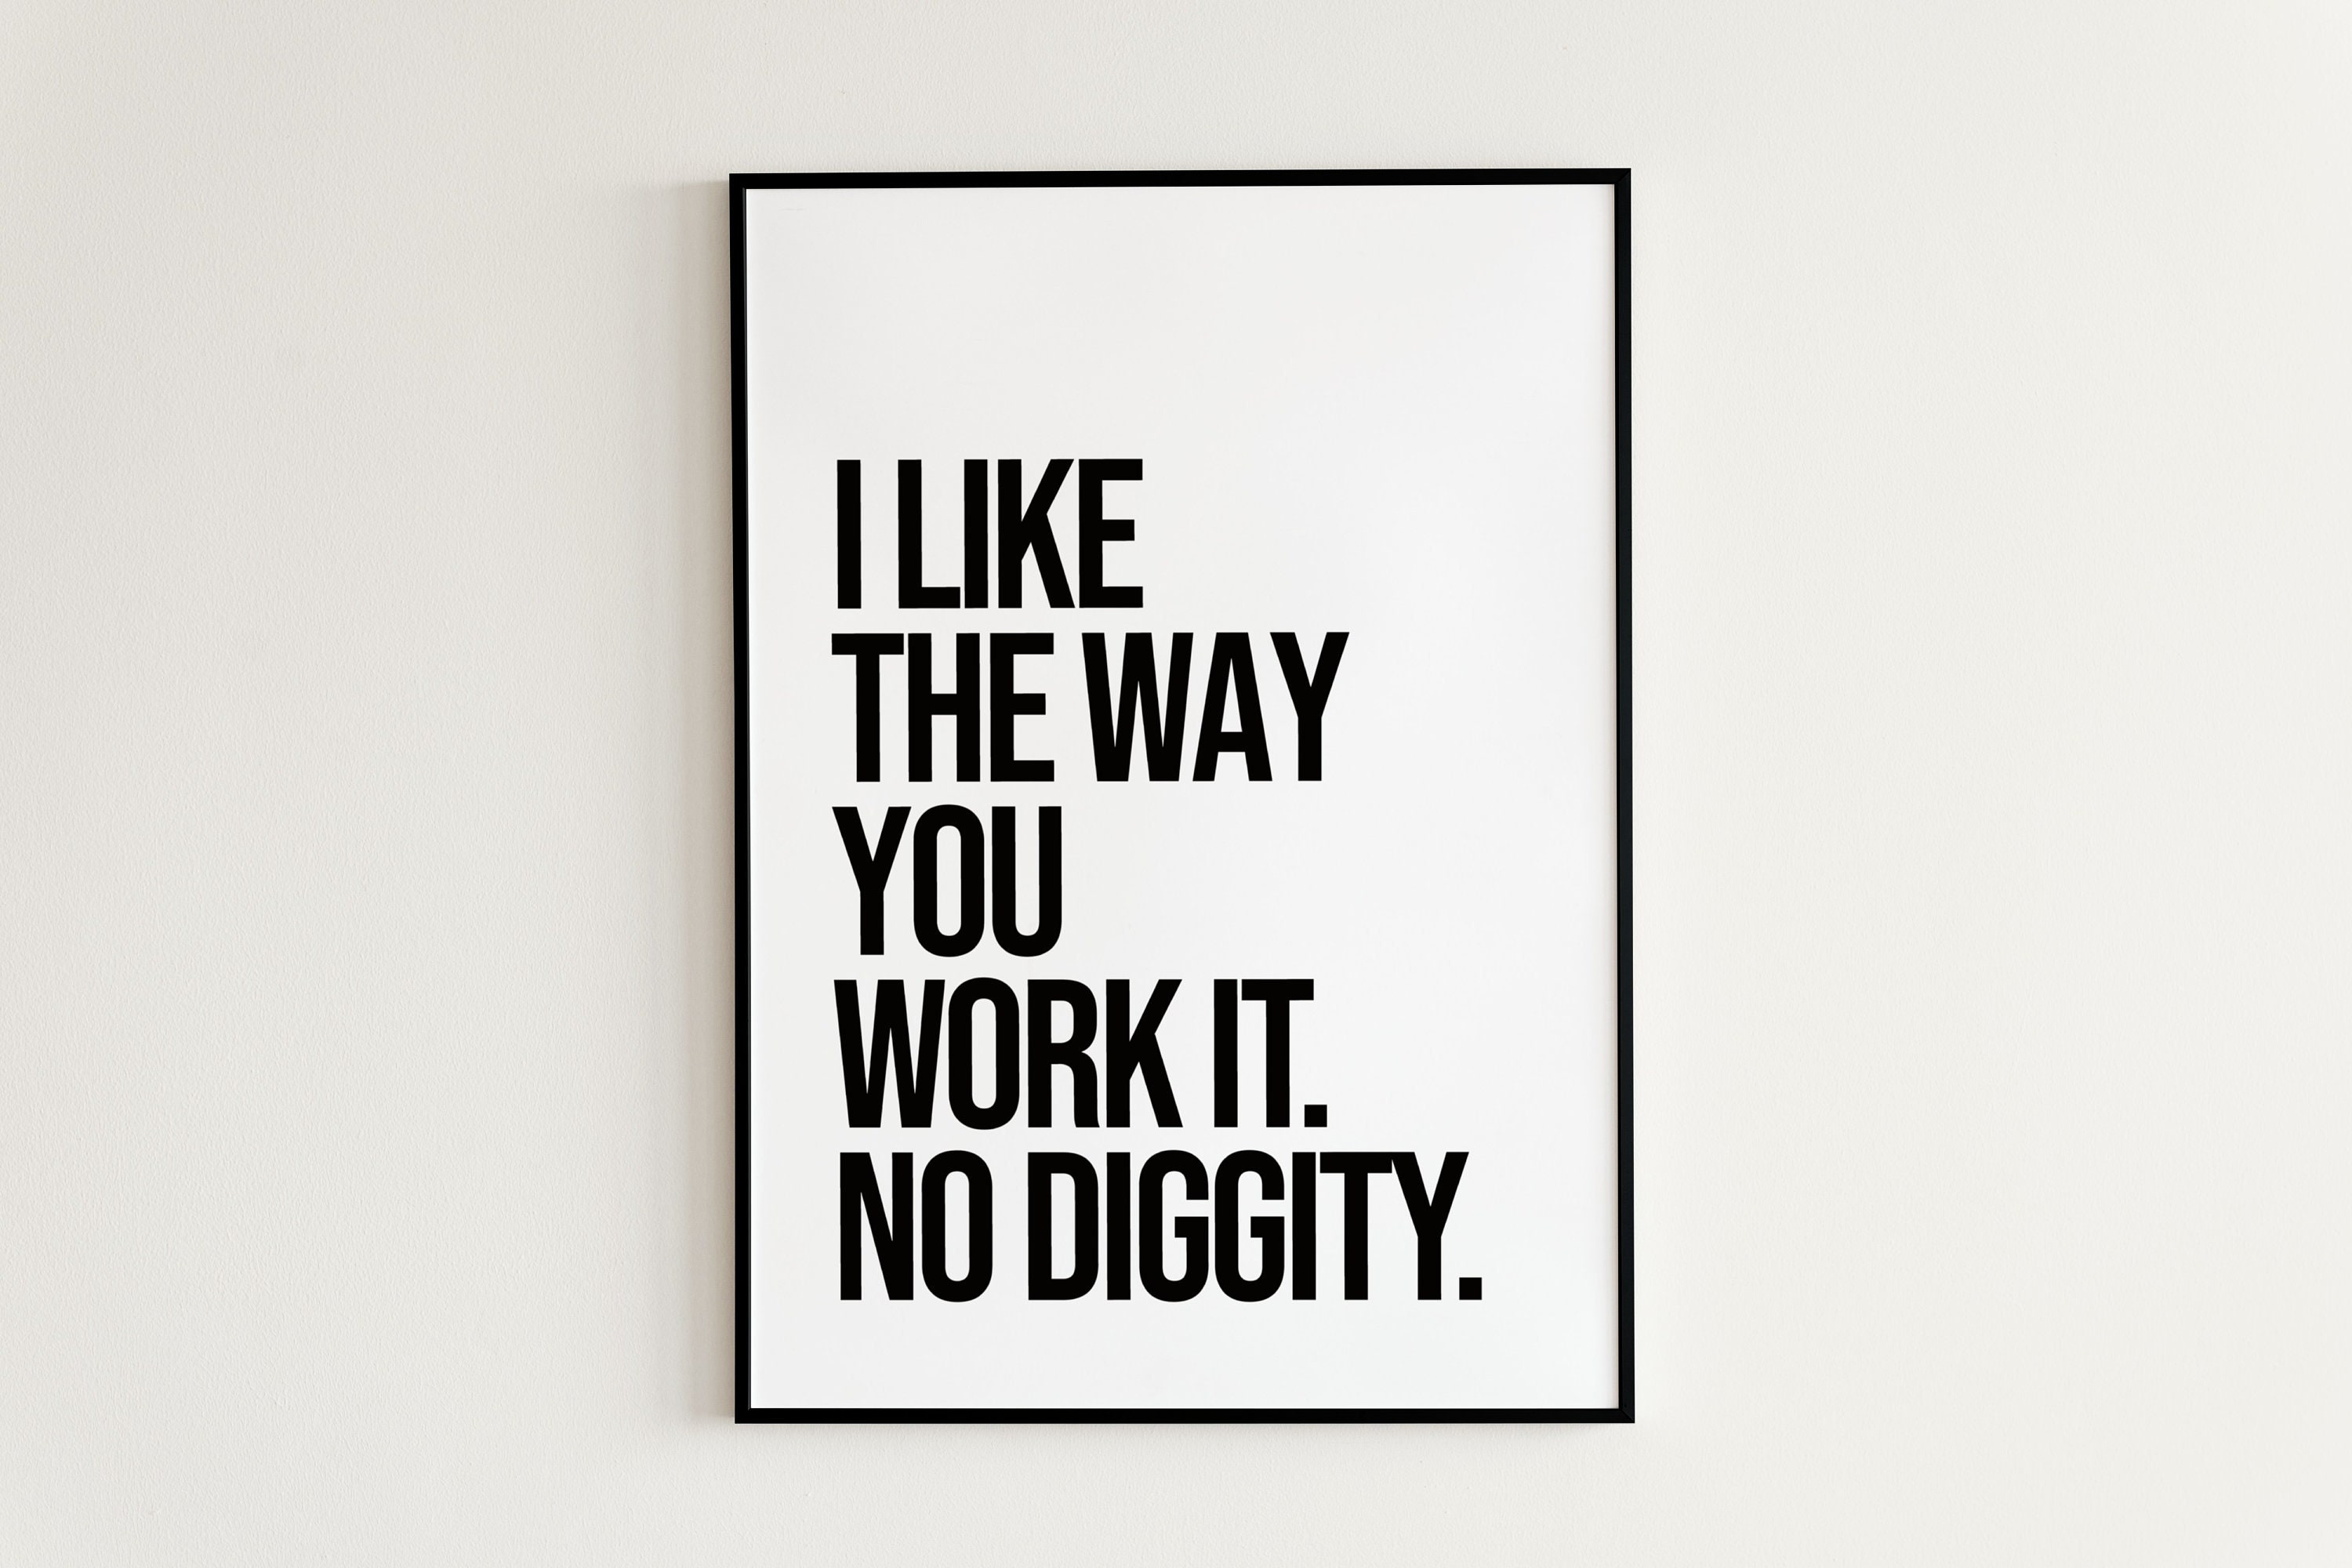  No Diggity Song Lyrics - Portrait Gallery Wrapped Framed Canvas  Prints - Home Decor Wall Art (16 x 24 x 1.5): Posters & Prints